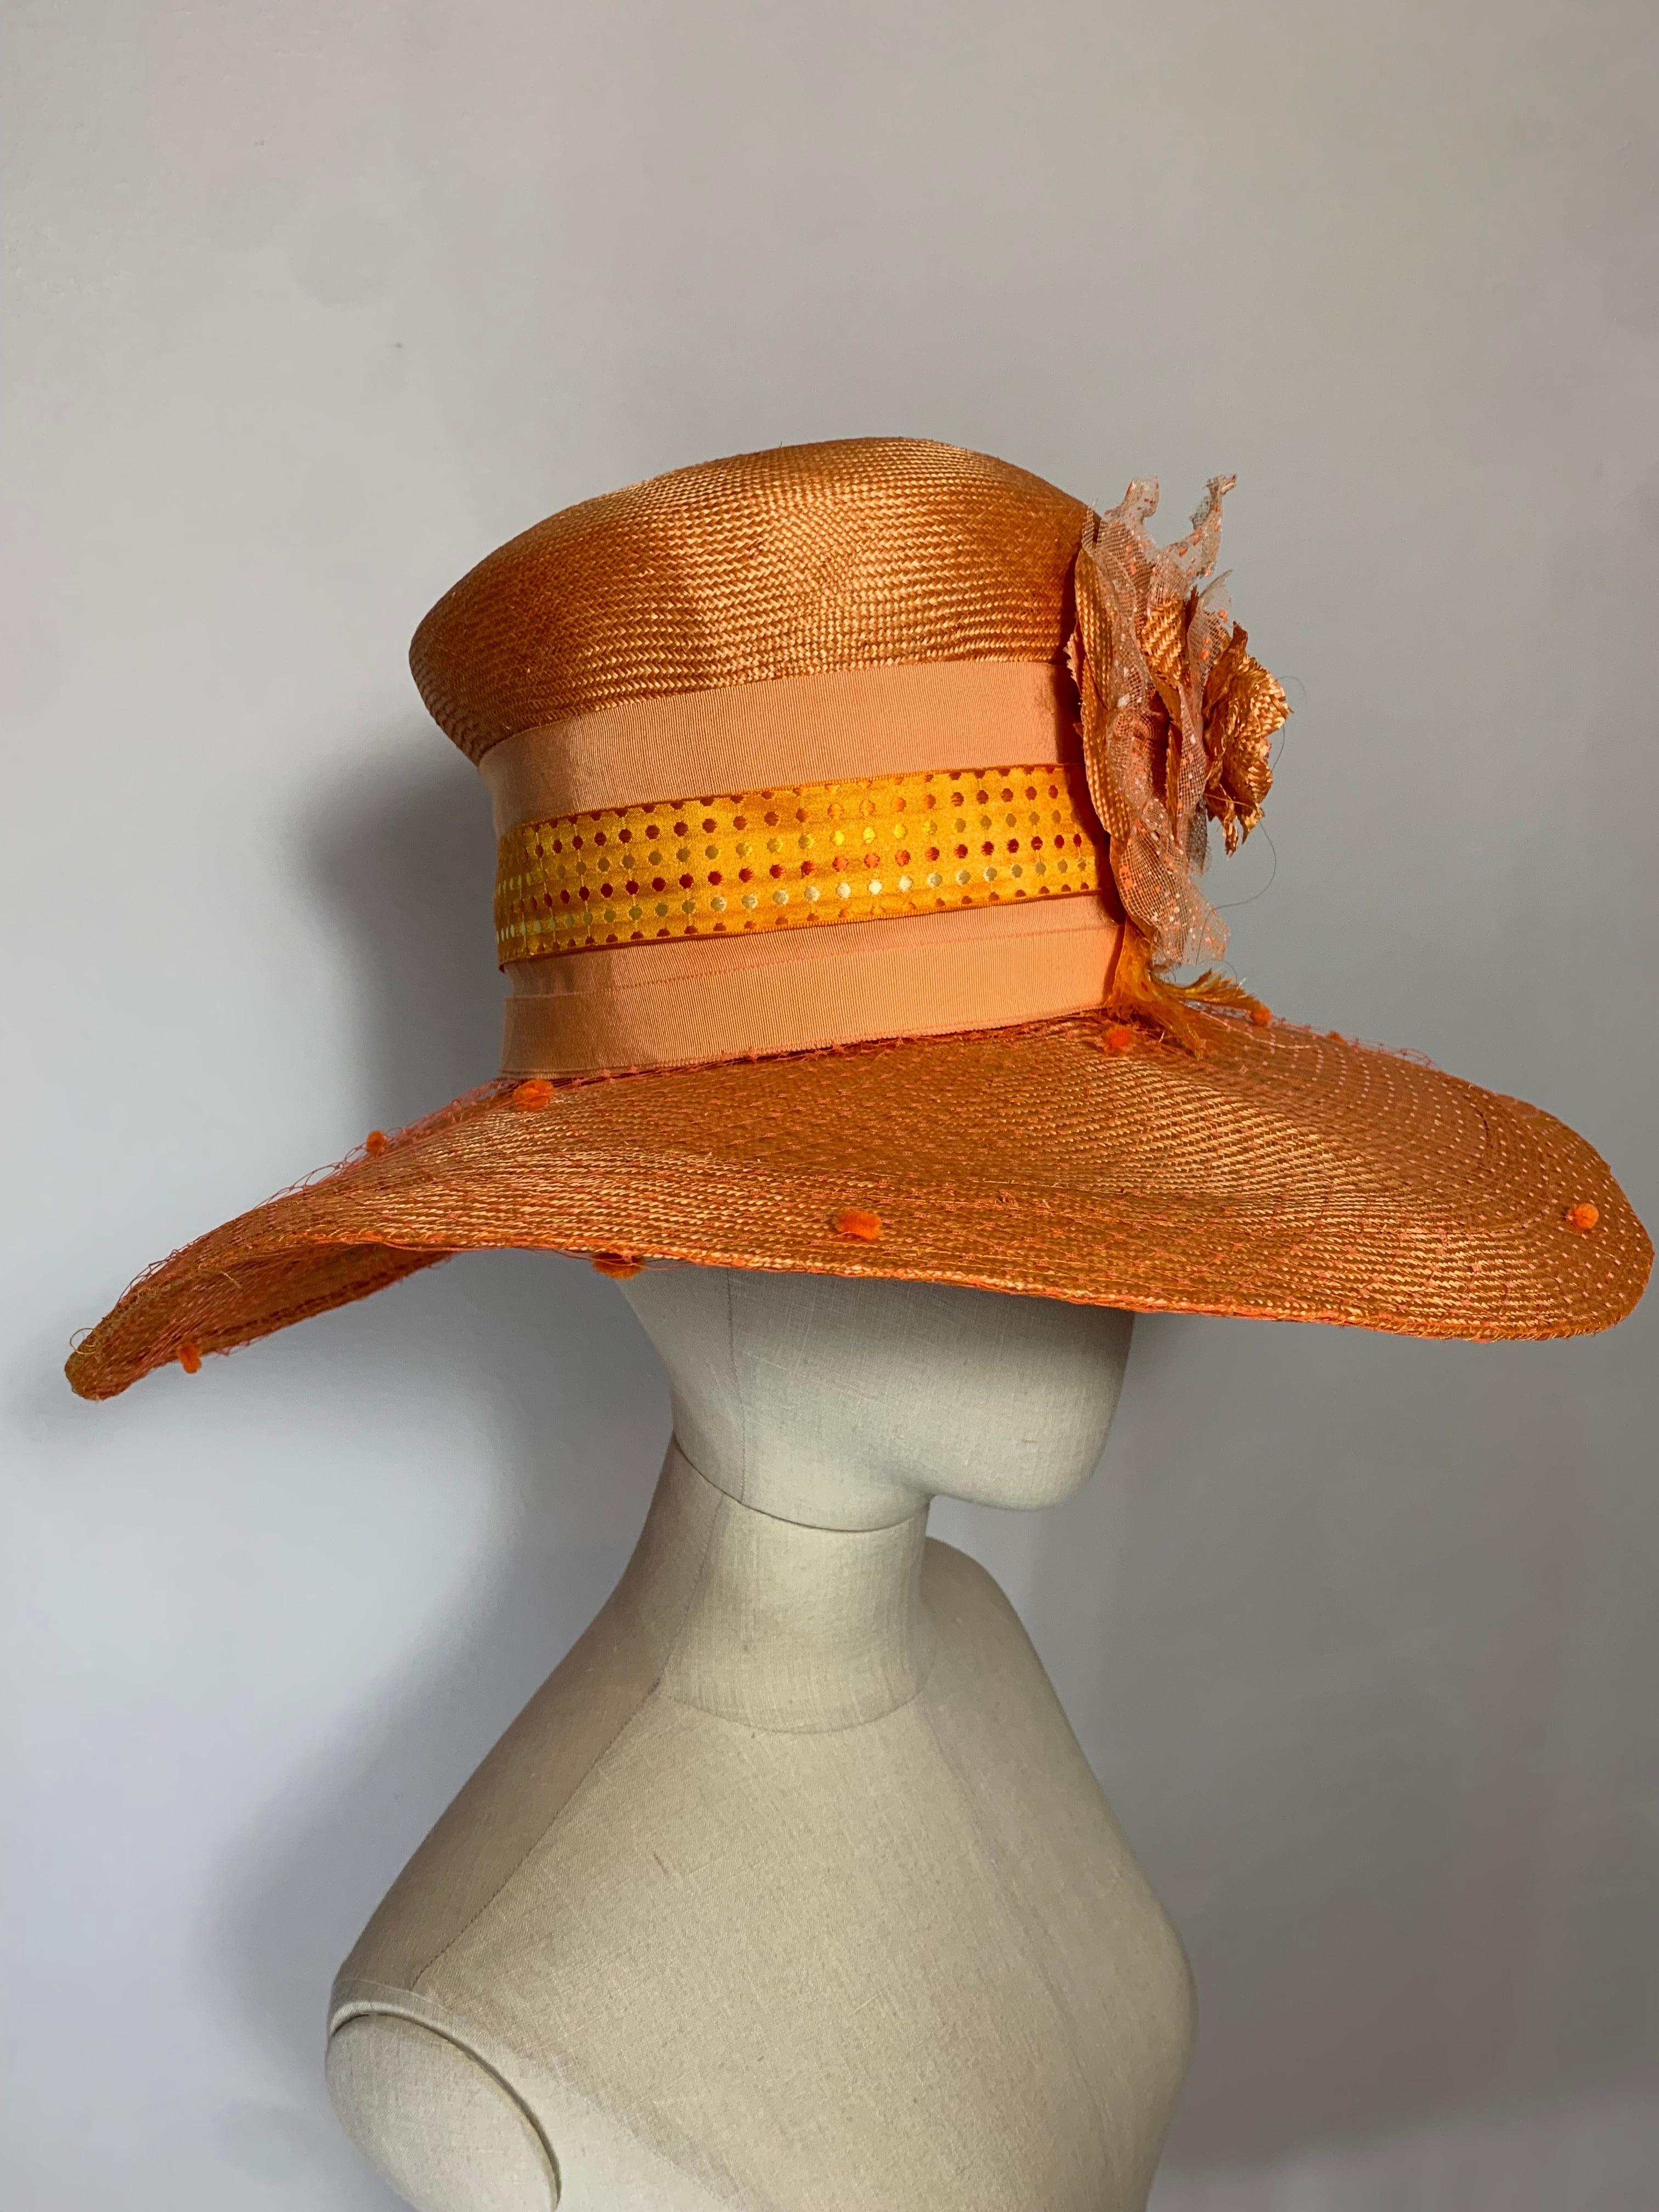 Custom Made Tangerine Straw Wide Brim Hat w Flower Embellishment and Veiled Brim In Excellent Condition For Sale In Gresham, OR